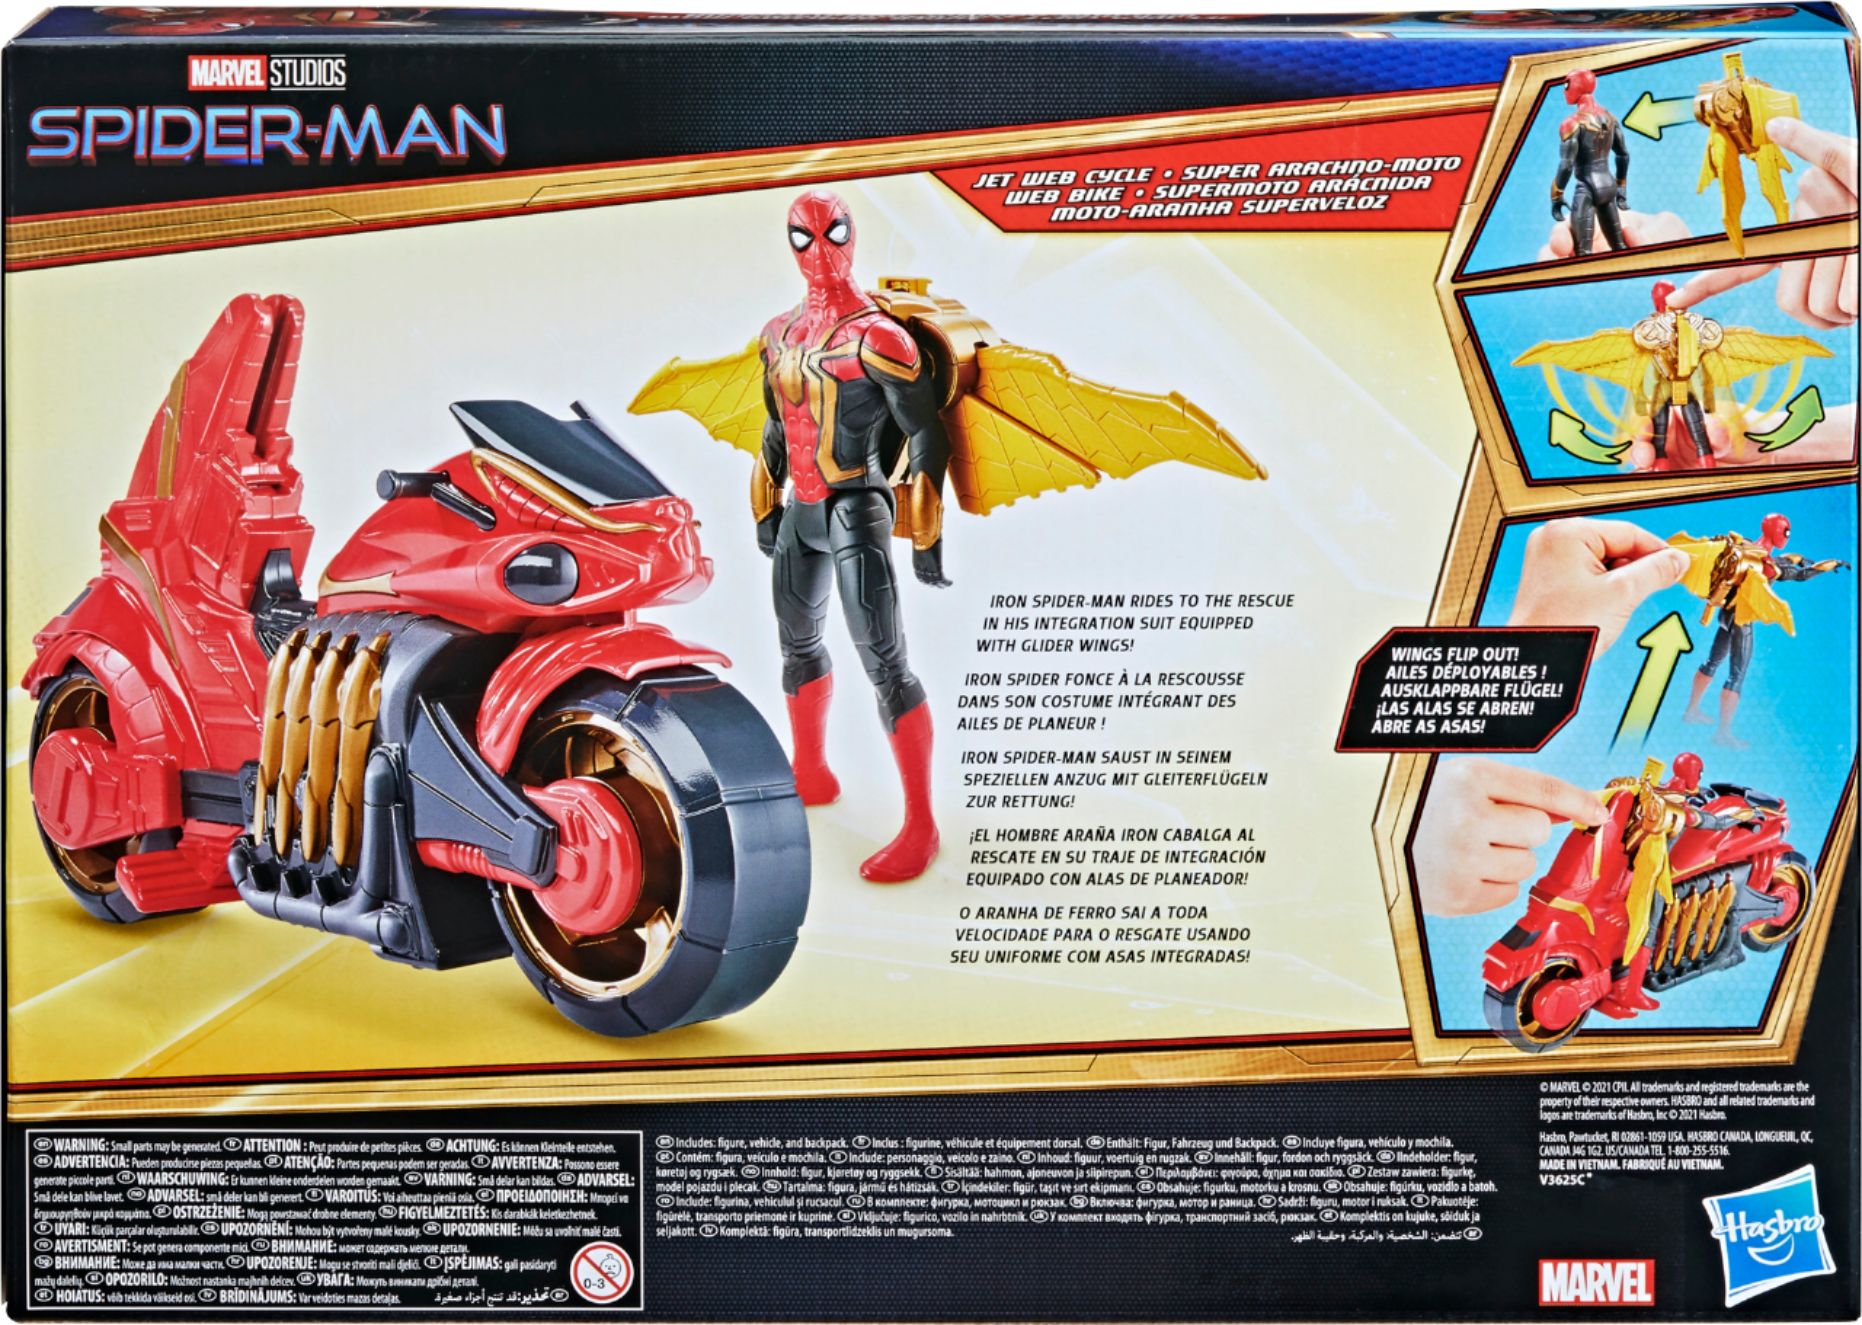 Marvel Spider-Man Figure with Cycle - Marvel